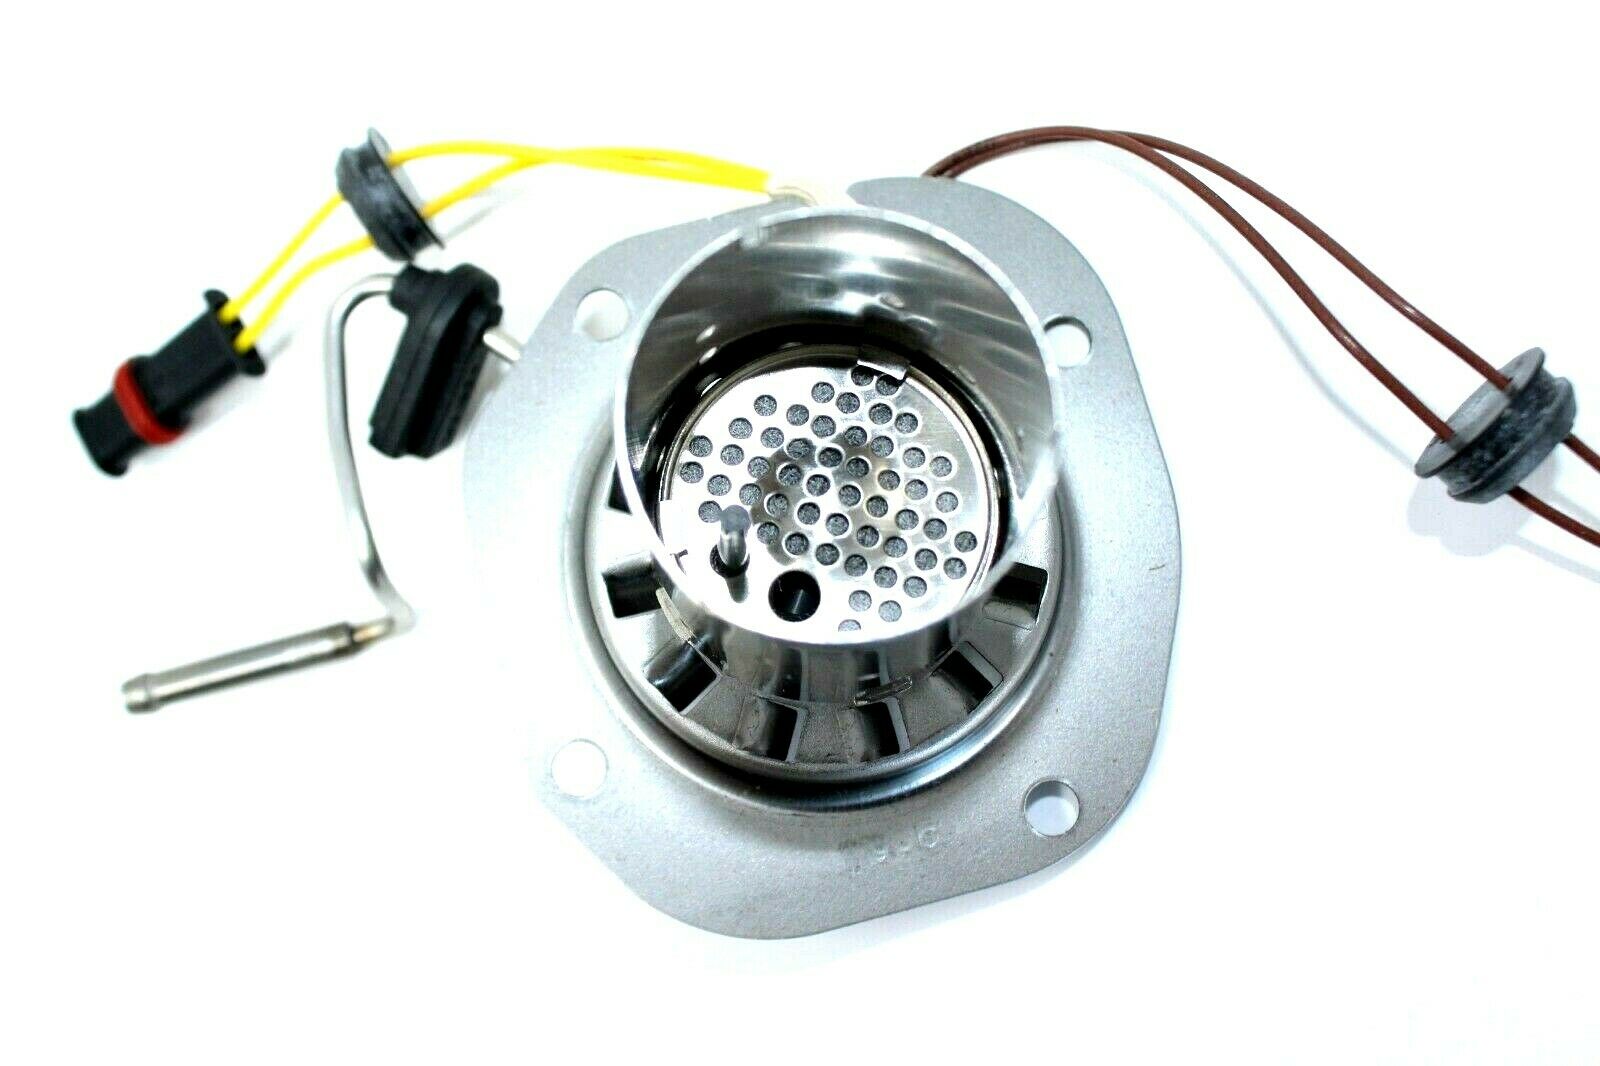 Webasto Burner Insert Assy Gas 12V With Glow Pin Flame Detector 9005092B Heater Part